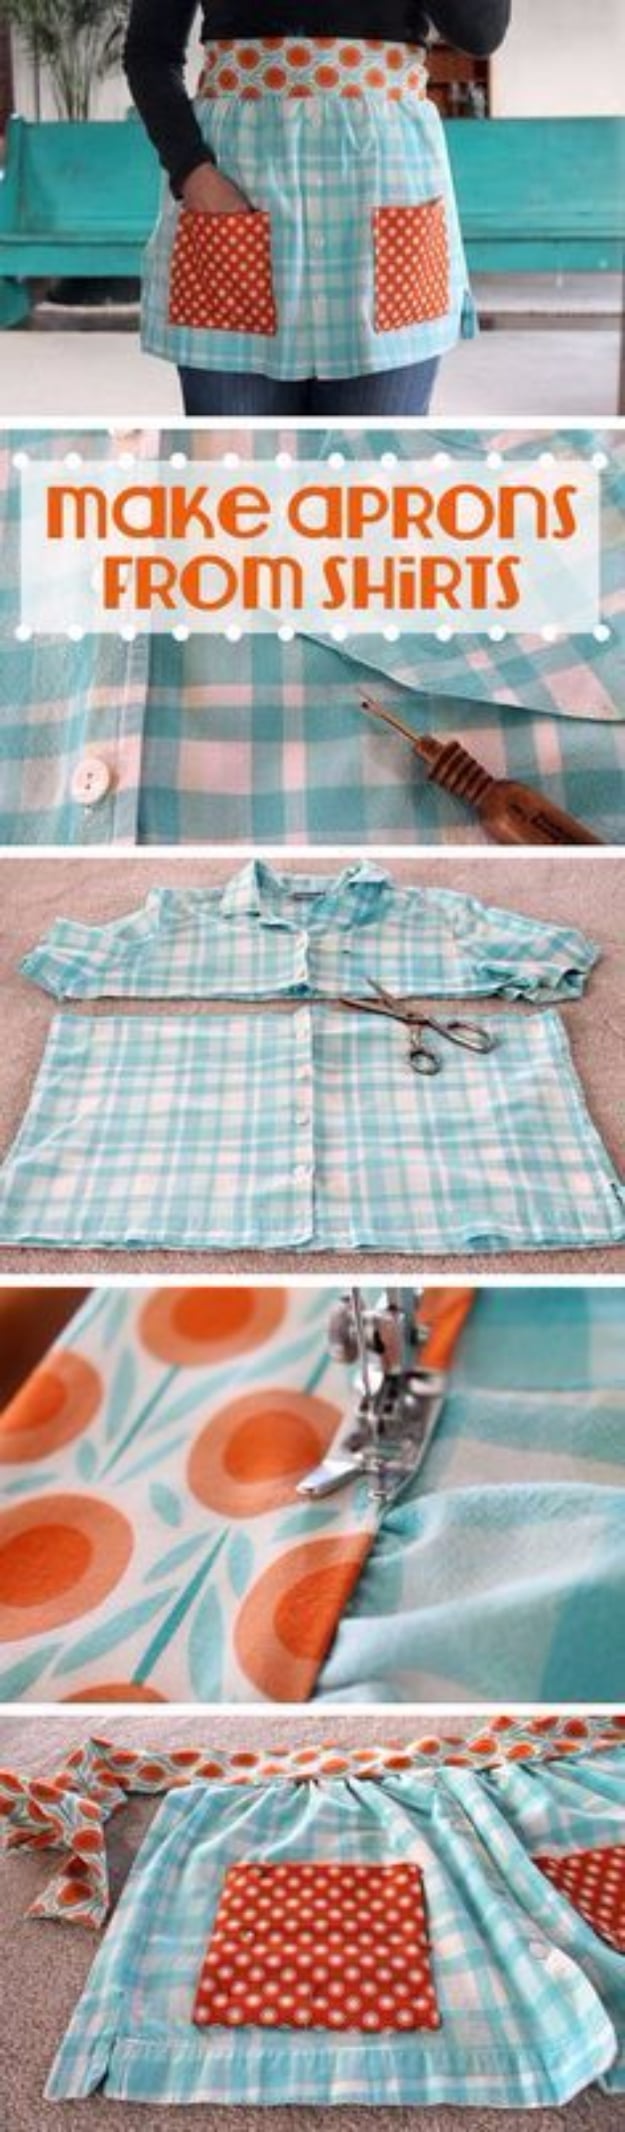 32 Great Things To Sew For Your Kitchen - DIY Joy